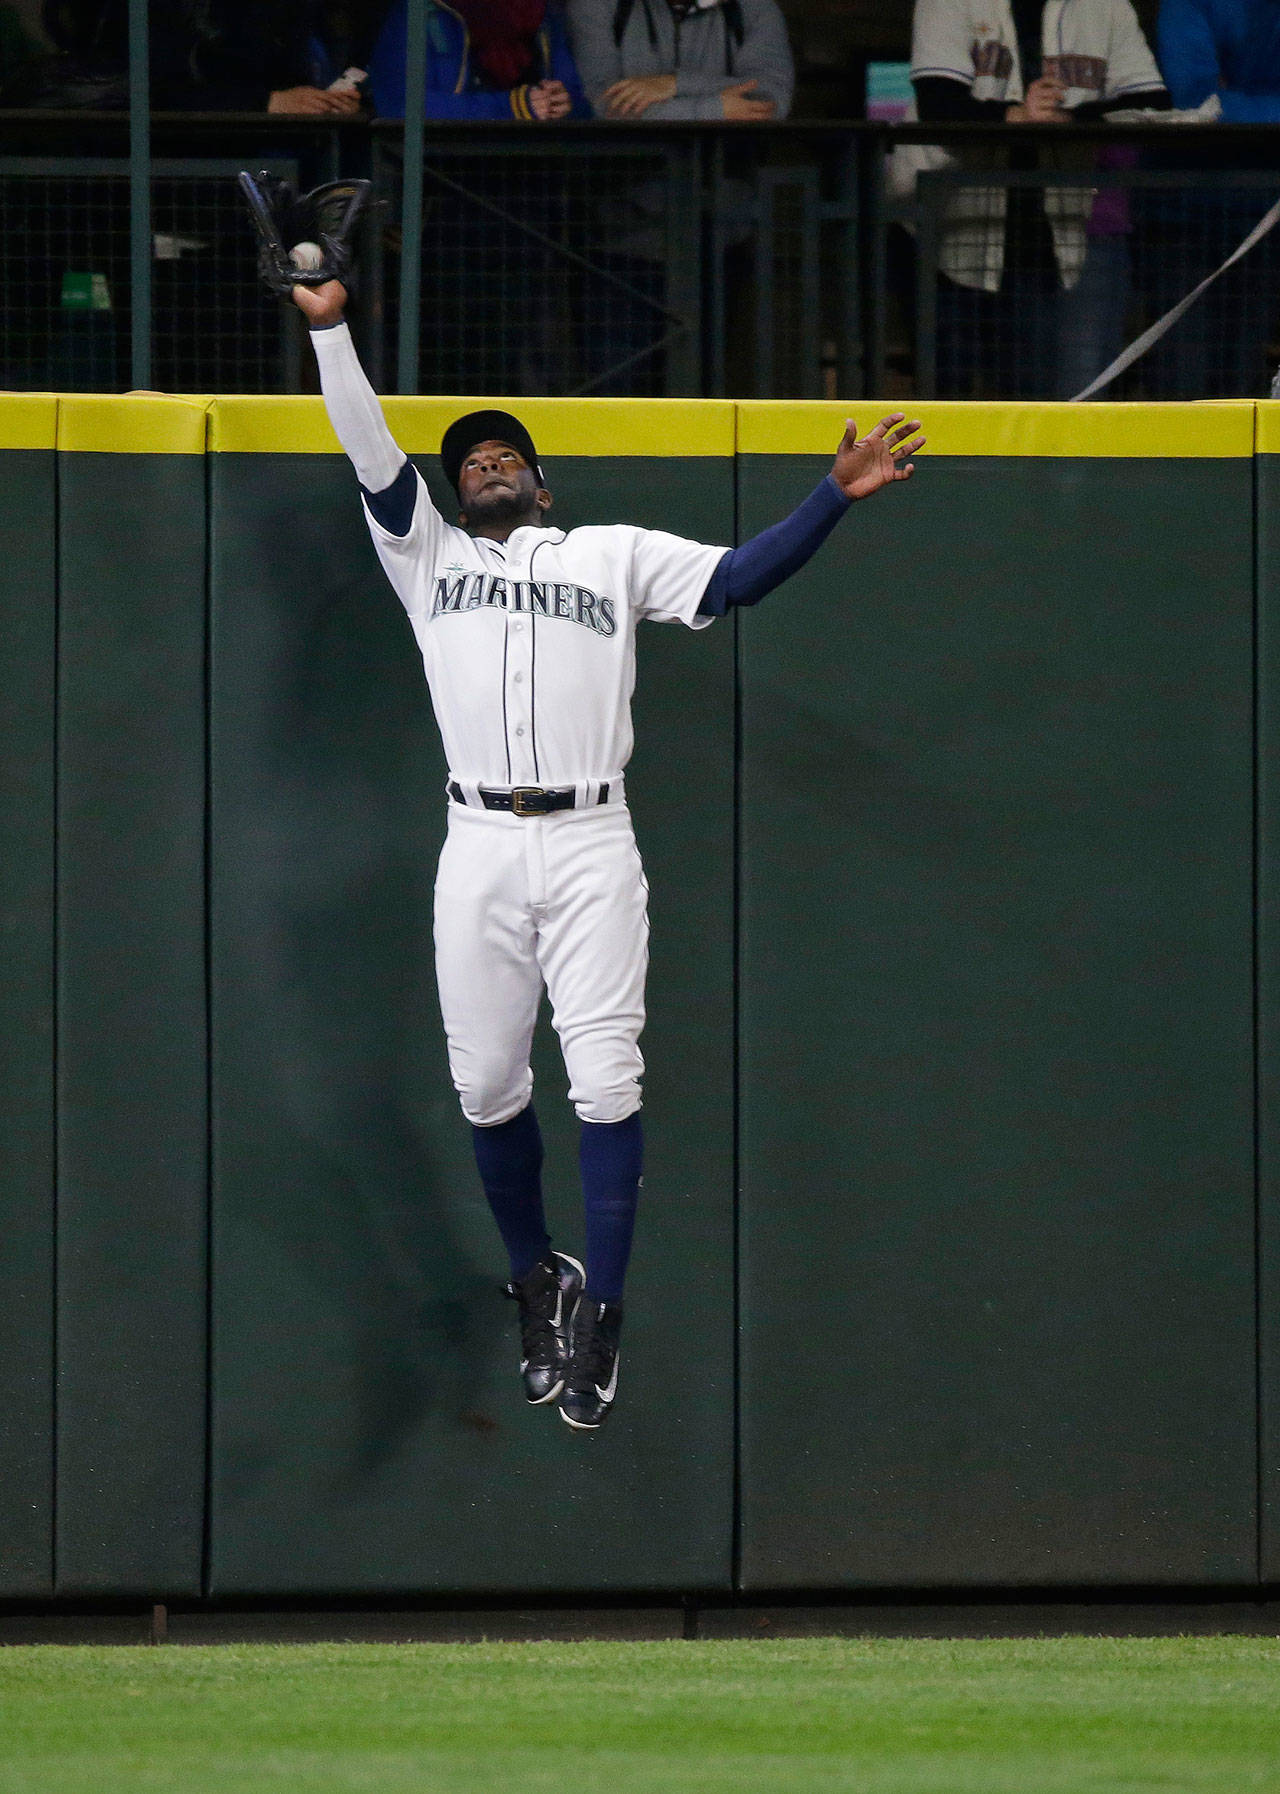 Mariners left fielder Guillermo Heredia leaps to rob the Marlins’ Marcell Ozuna of a home run during the first inning of a game April 18, 2017, in Seattle. (AP Photo/Ted S. Warren)